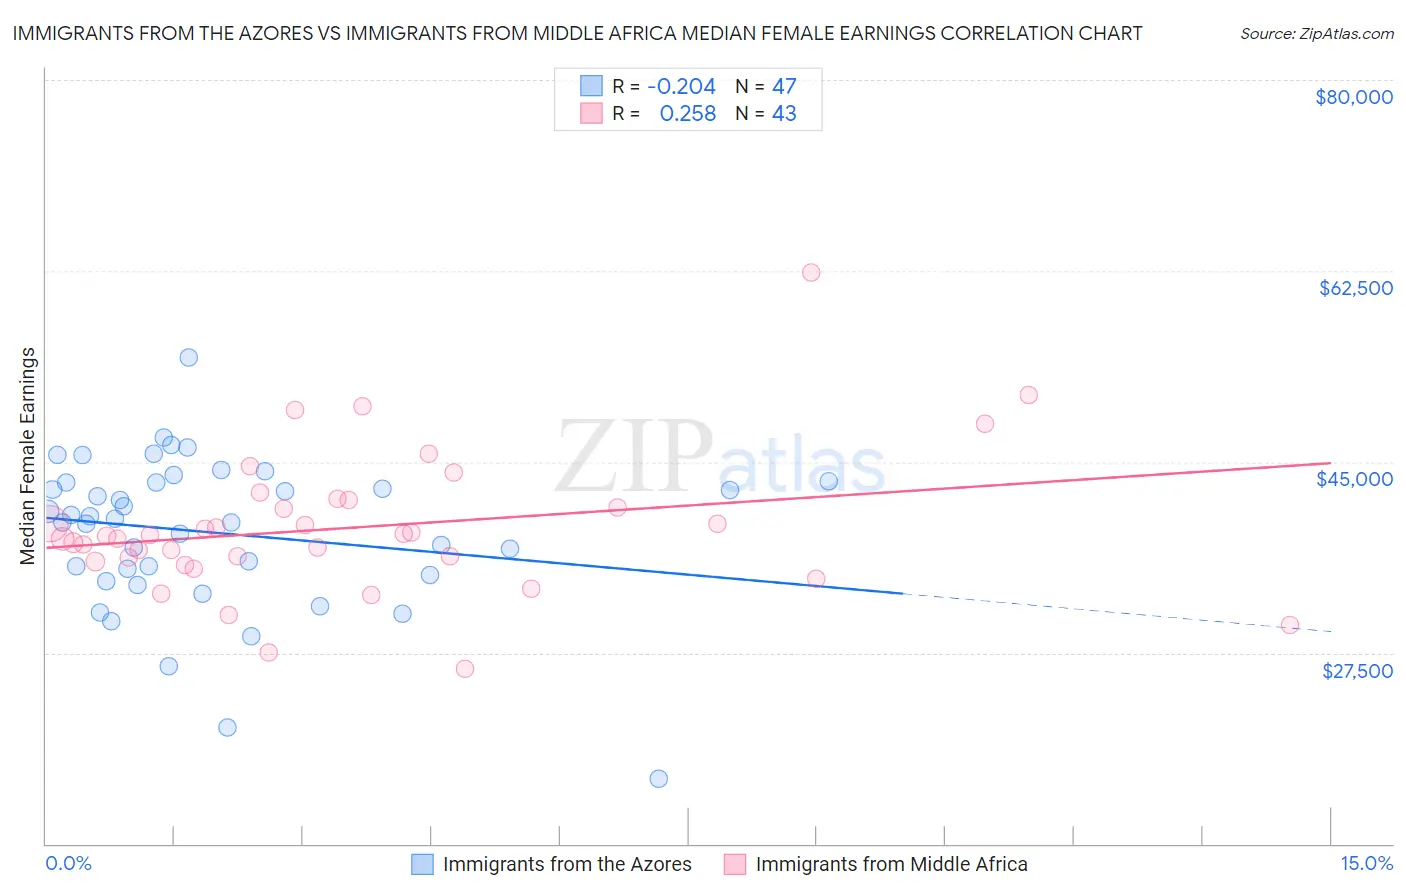 Immigrants from the Azores vs Immigrants from Middle Africa Median Female Earnings